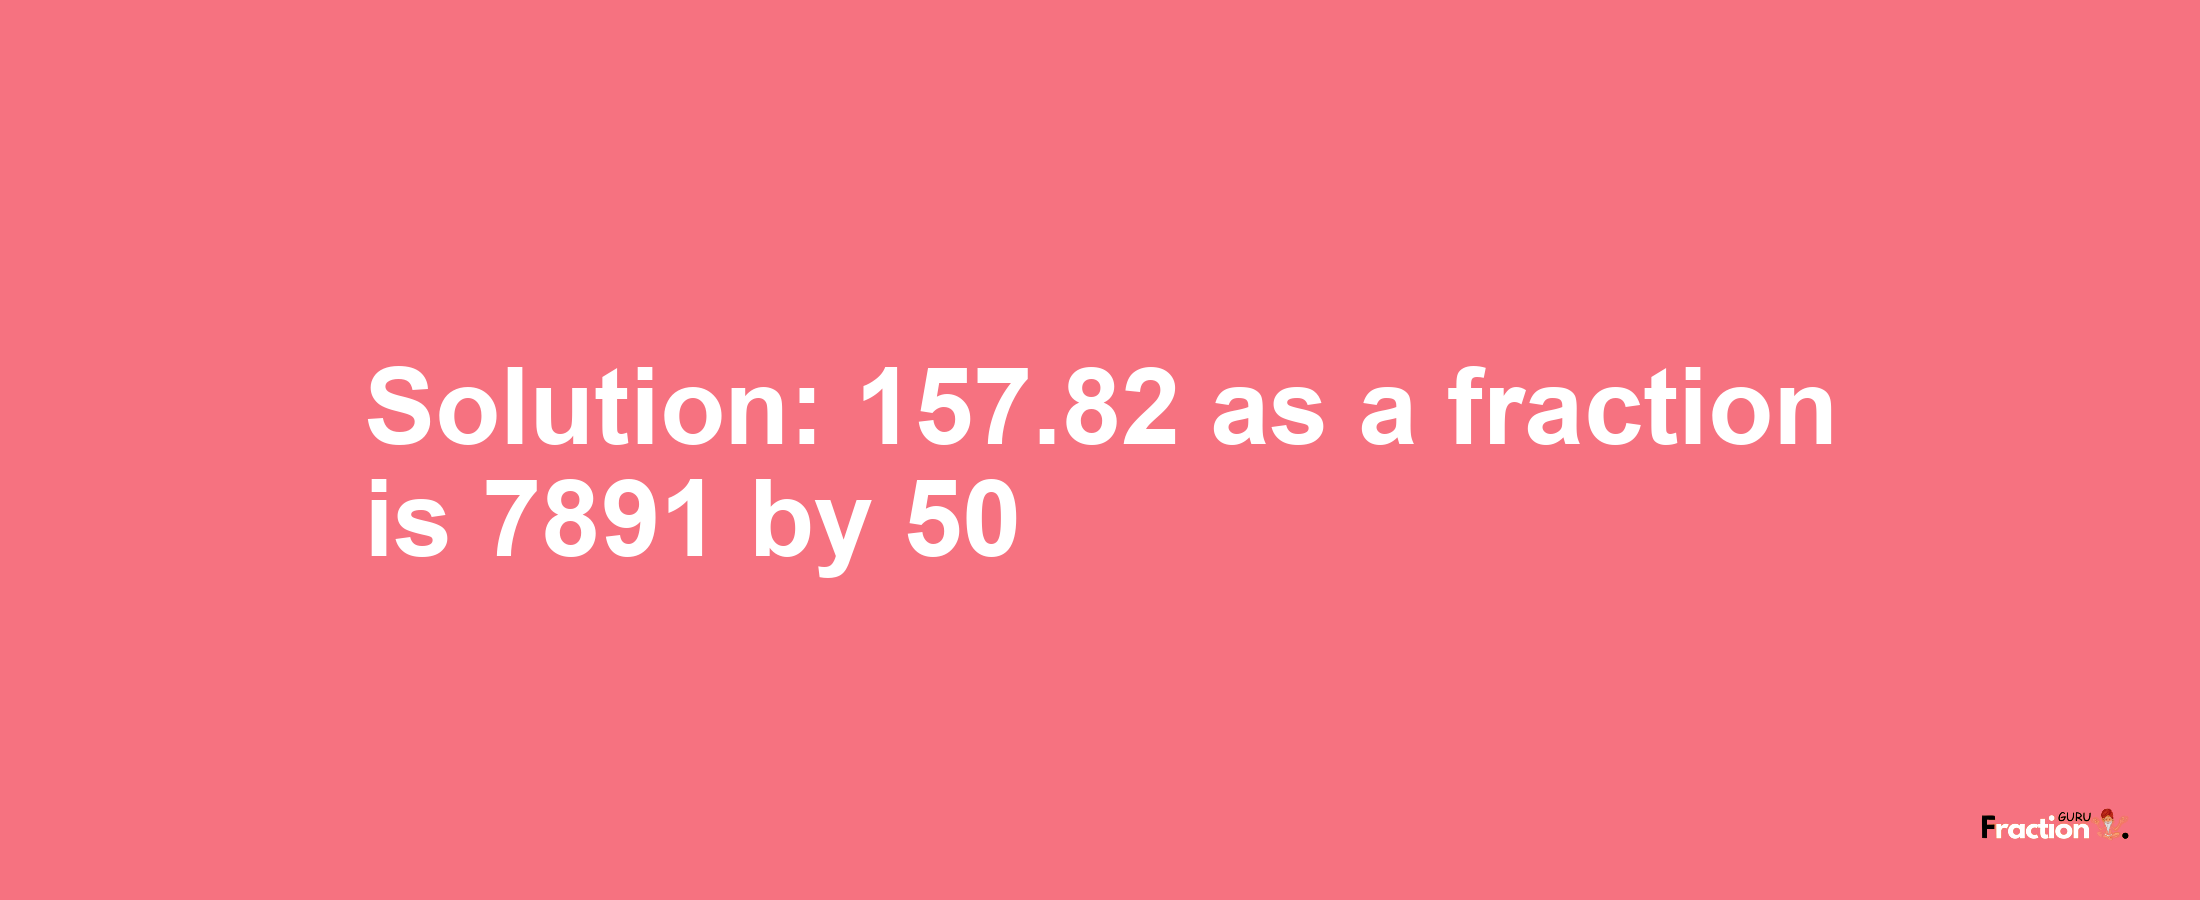 Solution:157.82 as a fraction is 7891/50